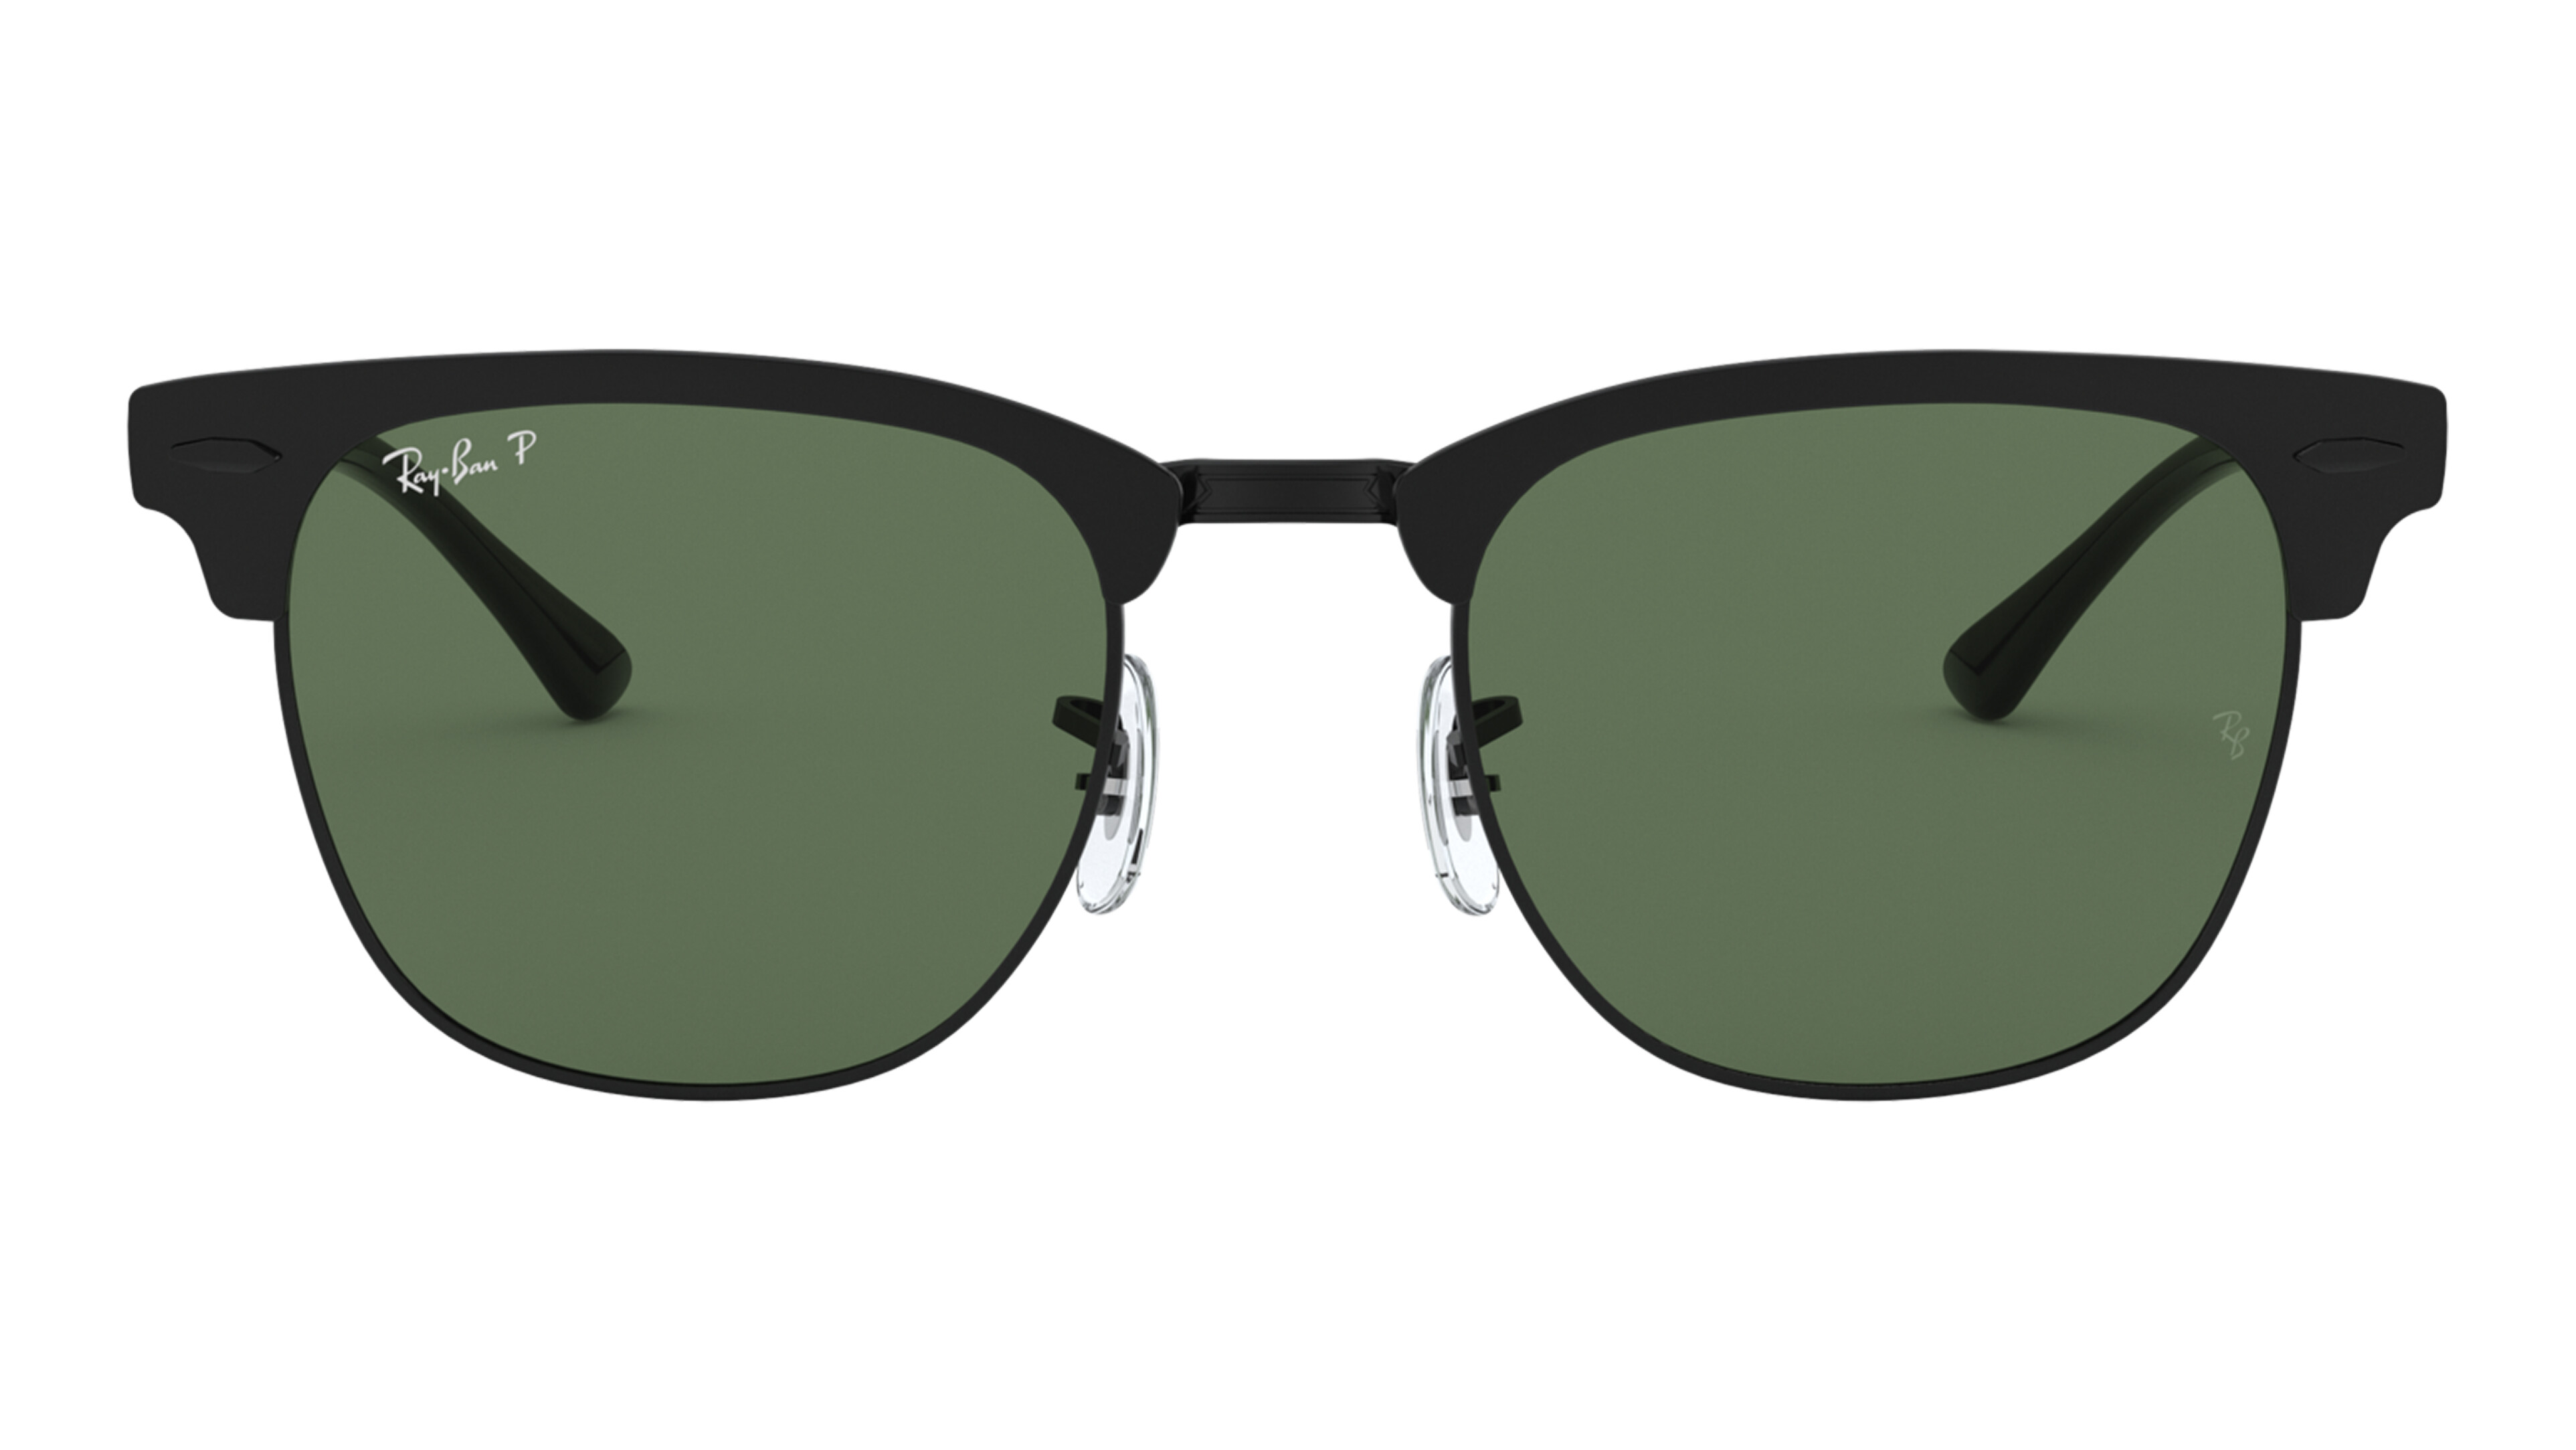 [products.image.front] Ray-Ban CLUBMASTER METAL 0RB3716 186/58 Sonnenbrille